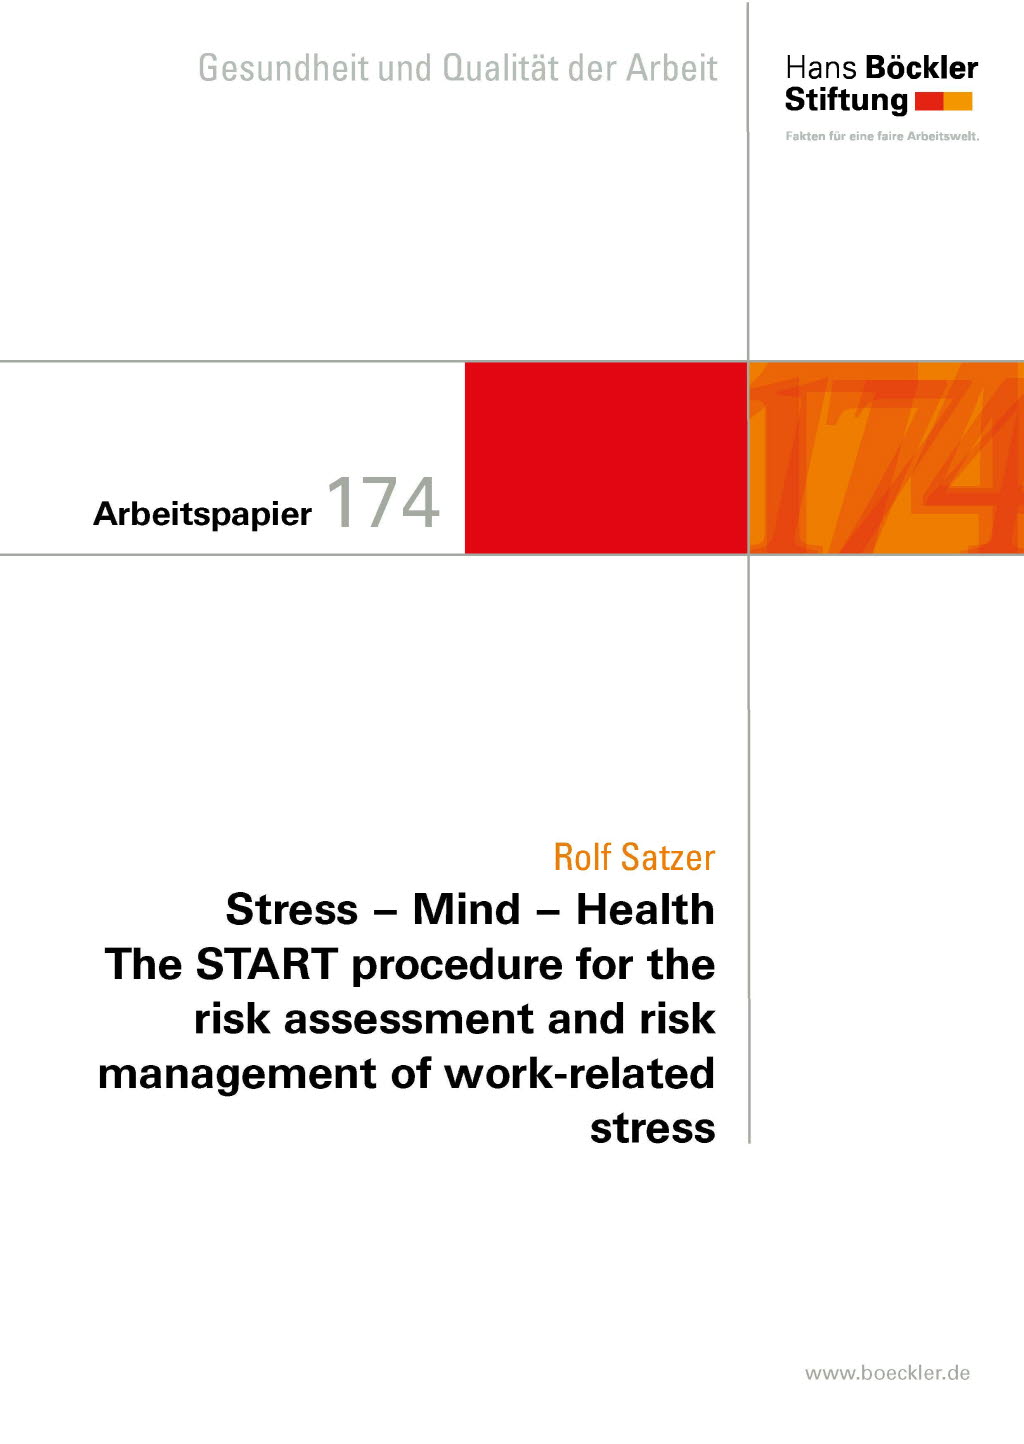 Stress - Mind - Health. The START procedure for the risk assessment and risk management of work-related stress